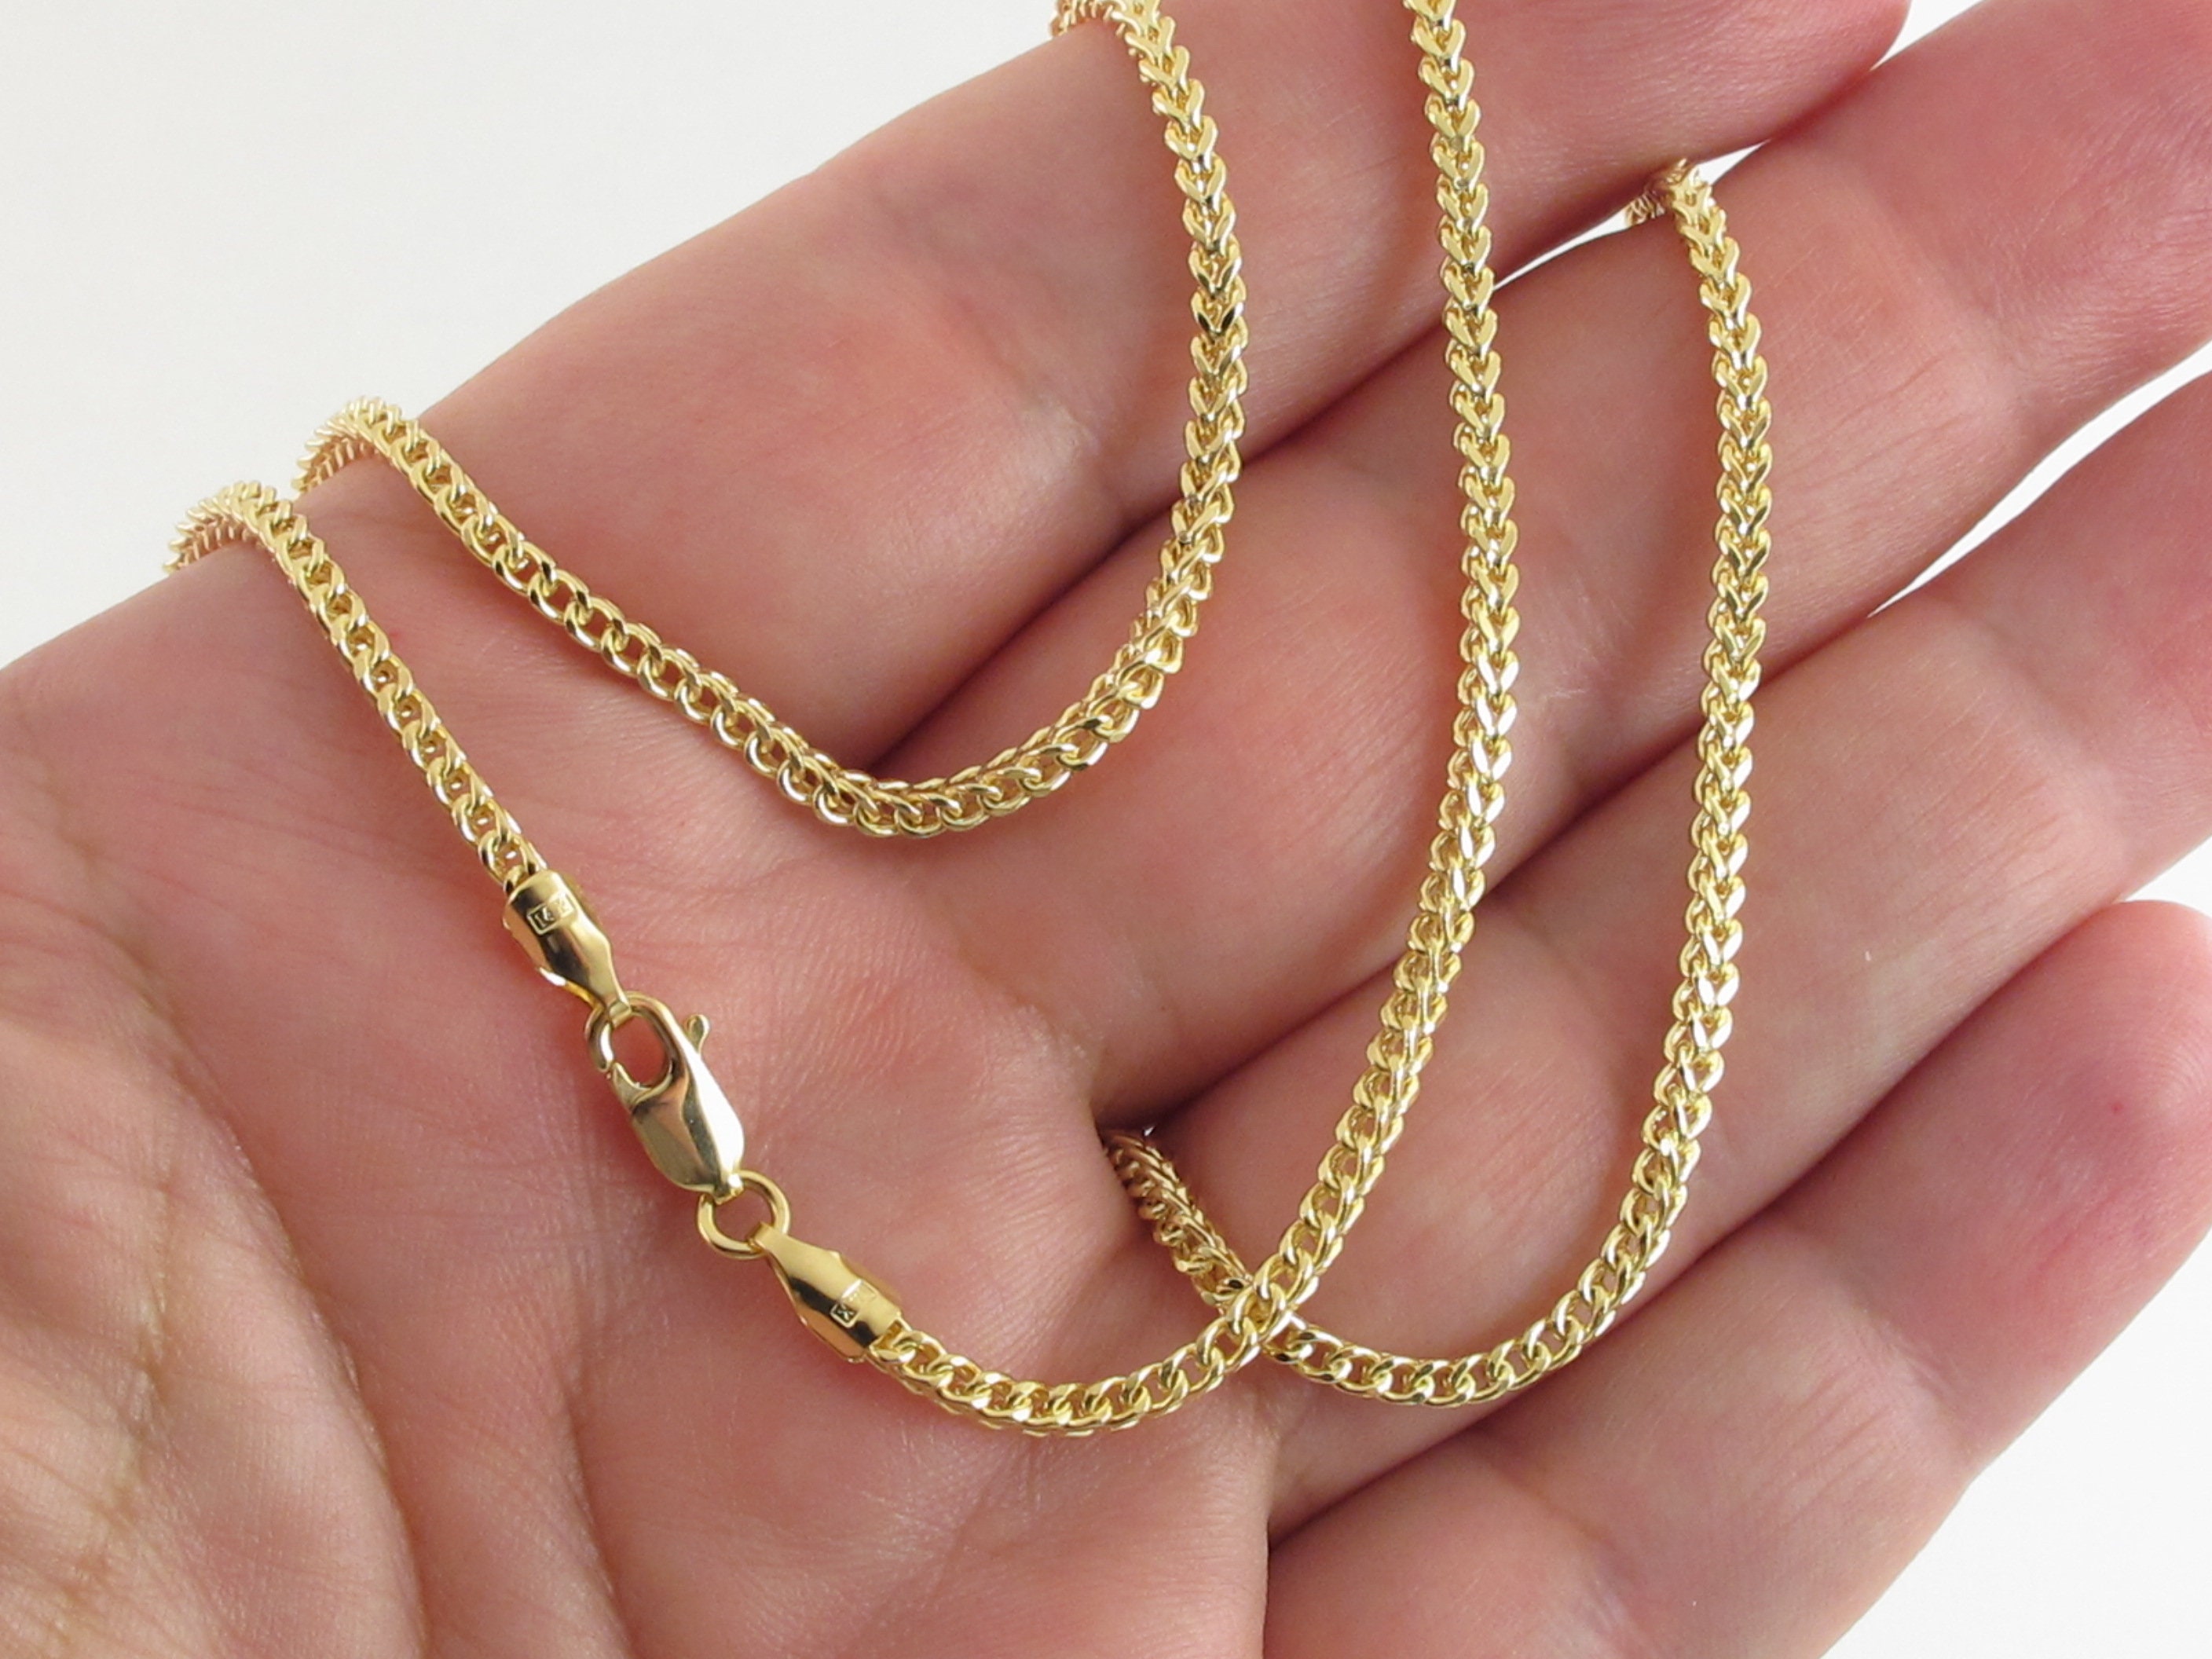 10K Yellow Gold 2.5mm Foxtail Box Wheat Franco Pendant Necklace Chain 16" 30"